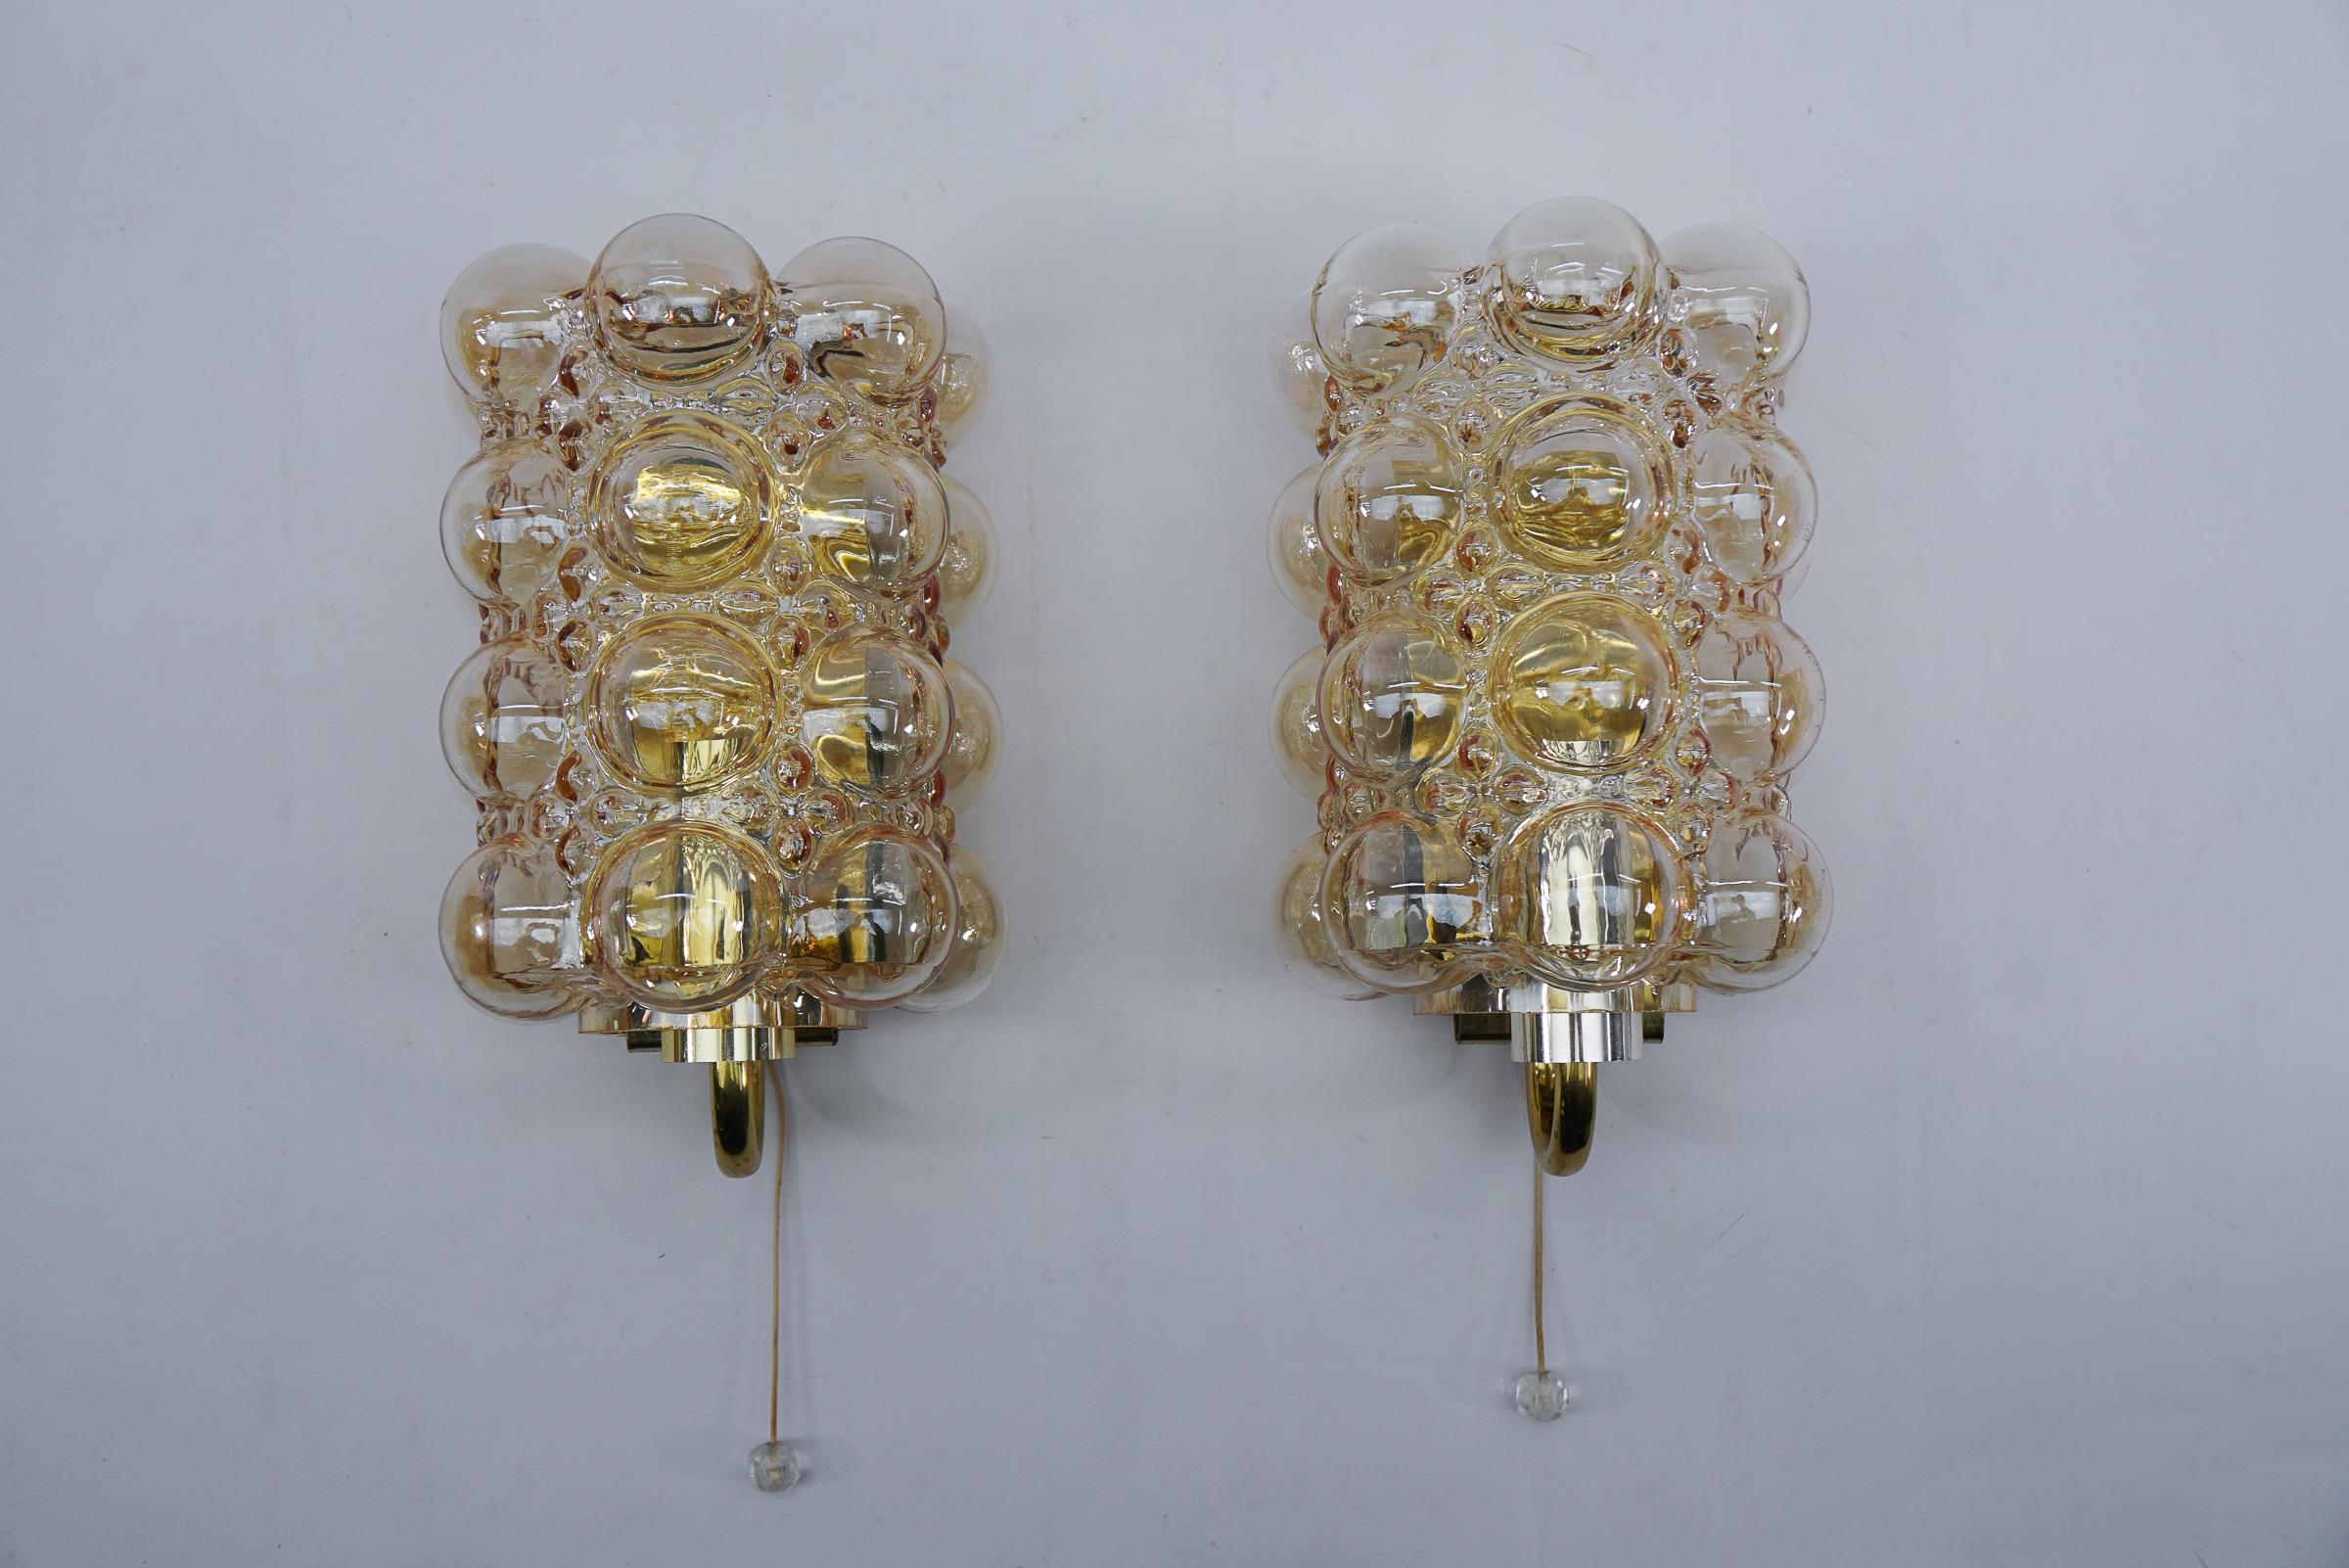 Executed in glass and metal. Each lamp need 1 x E14 / E15 Edison screw fit bulb is wired, in working condition and runs both on 110 / 230 volt. Dimmable.

Our lamps are checked, cleaned and are suitable for use in the USA.